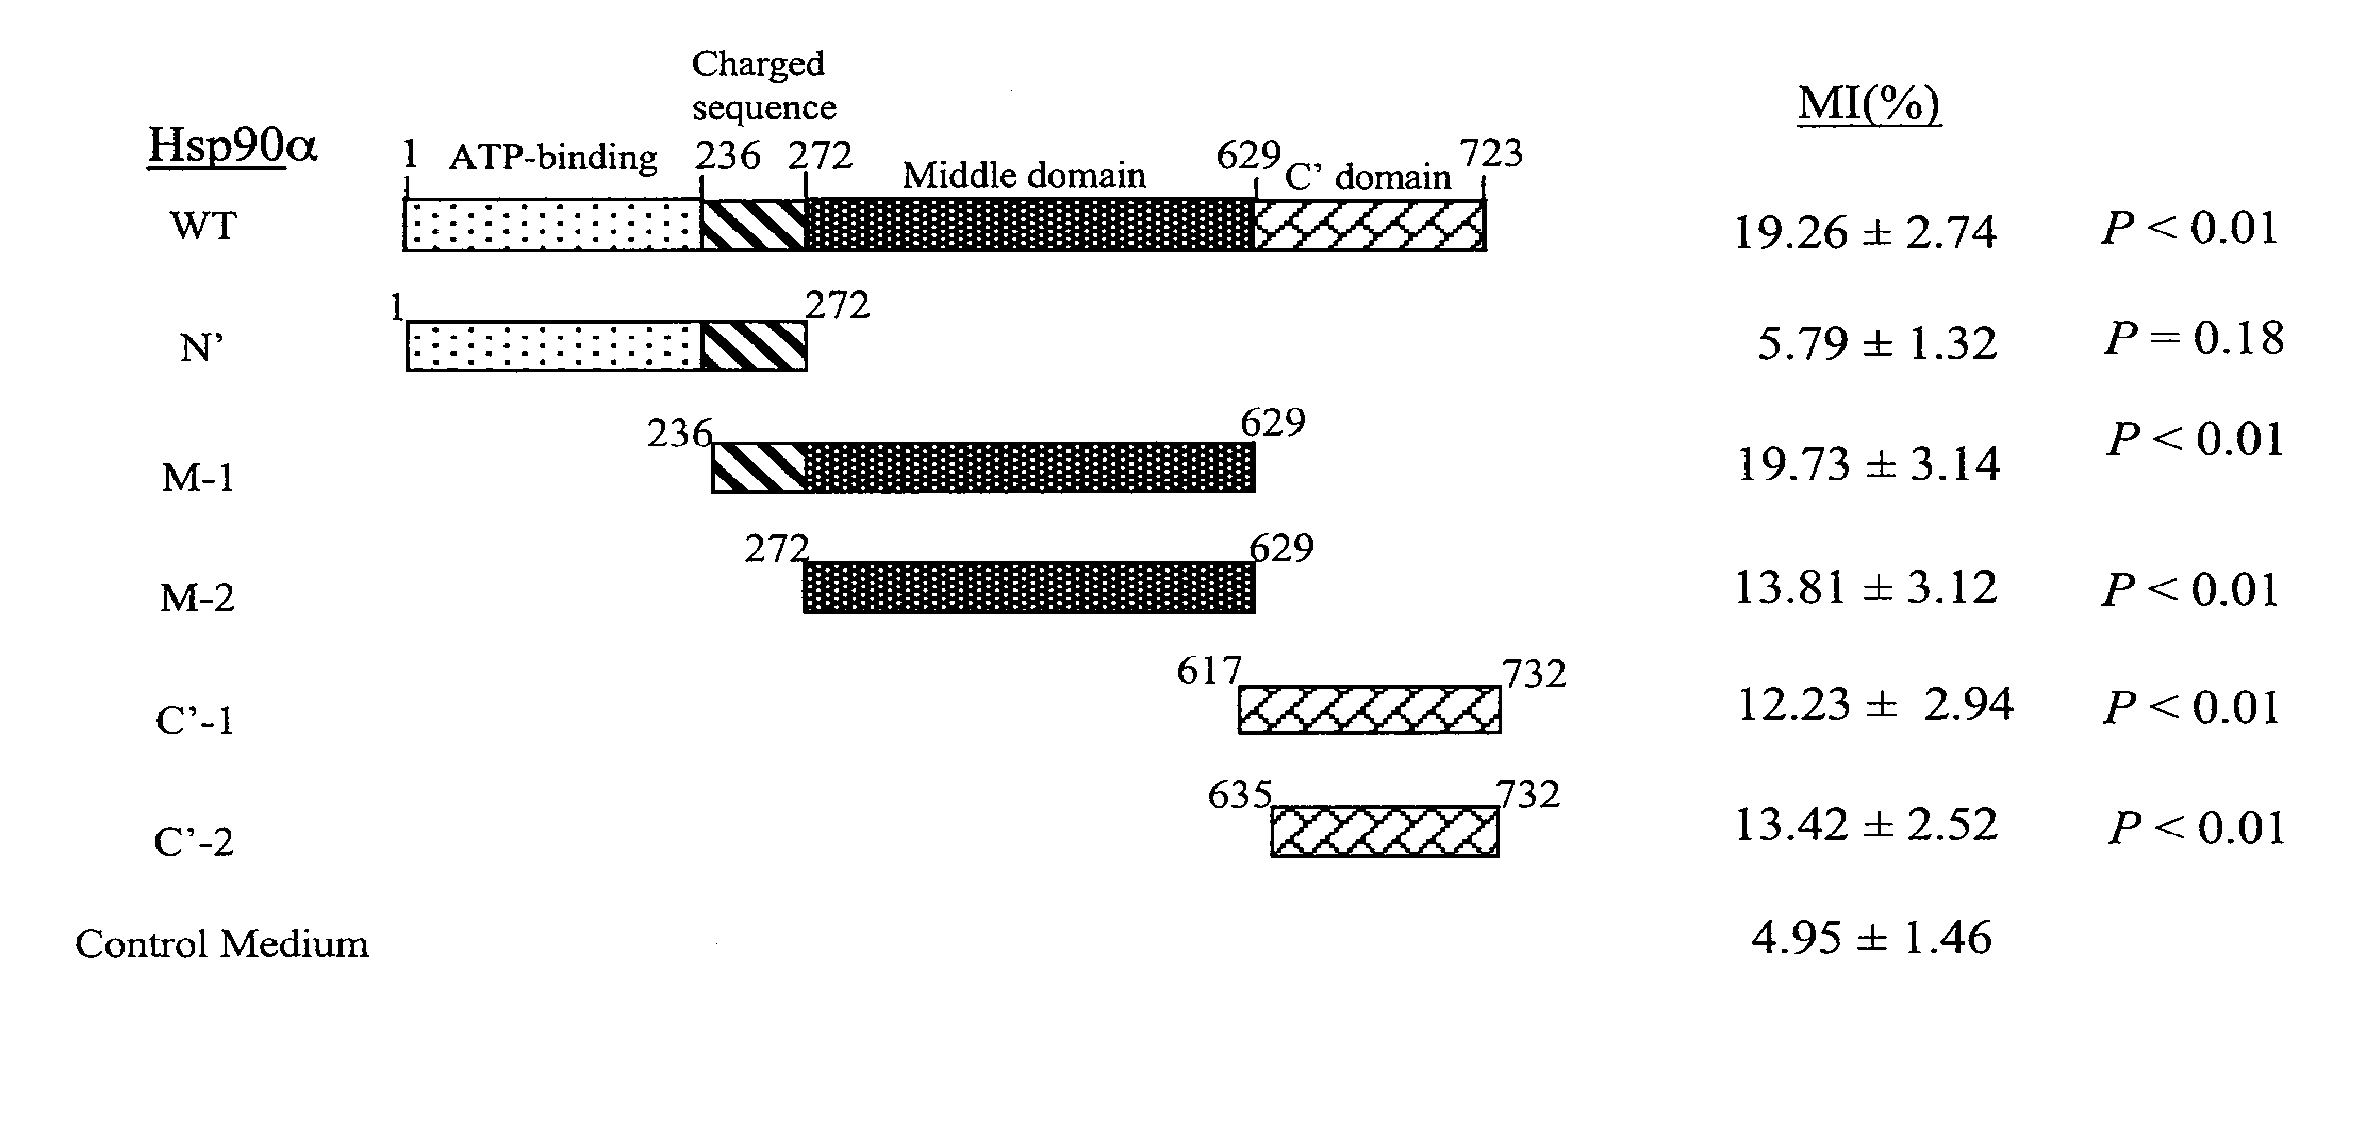 Skin wound healing compositions and methods of use thereof